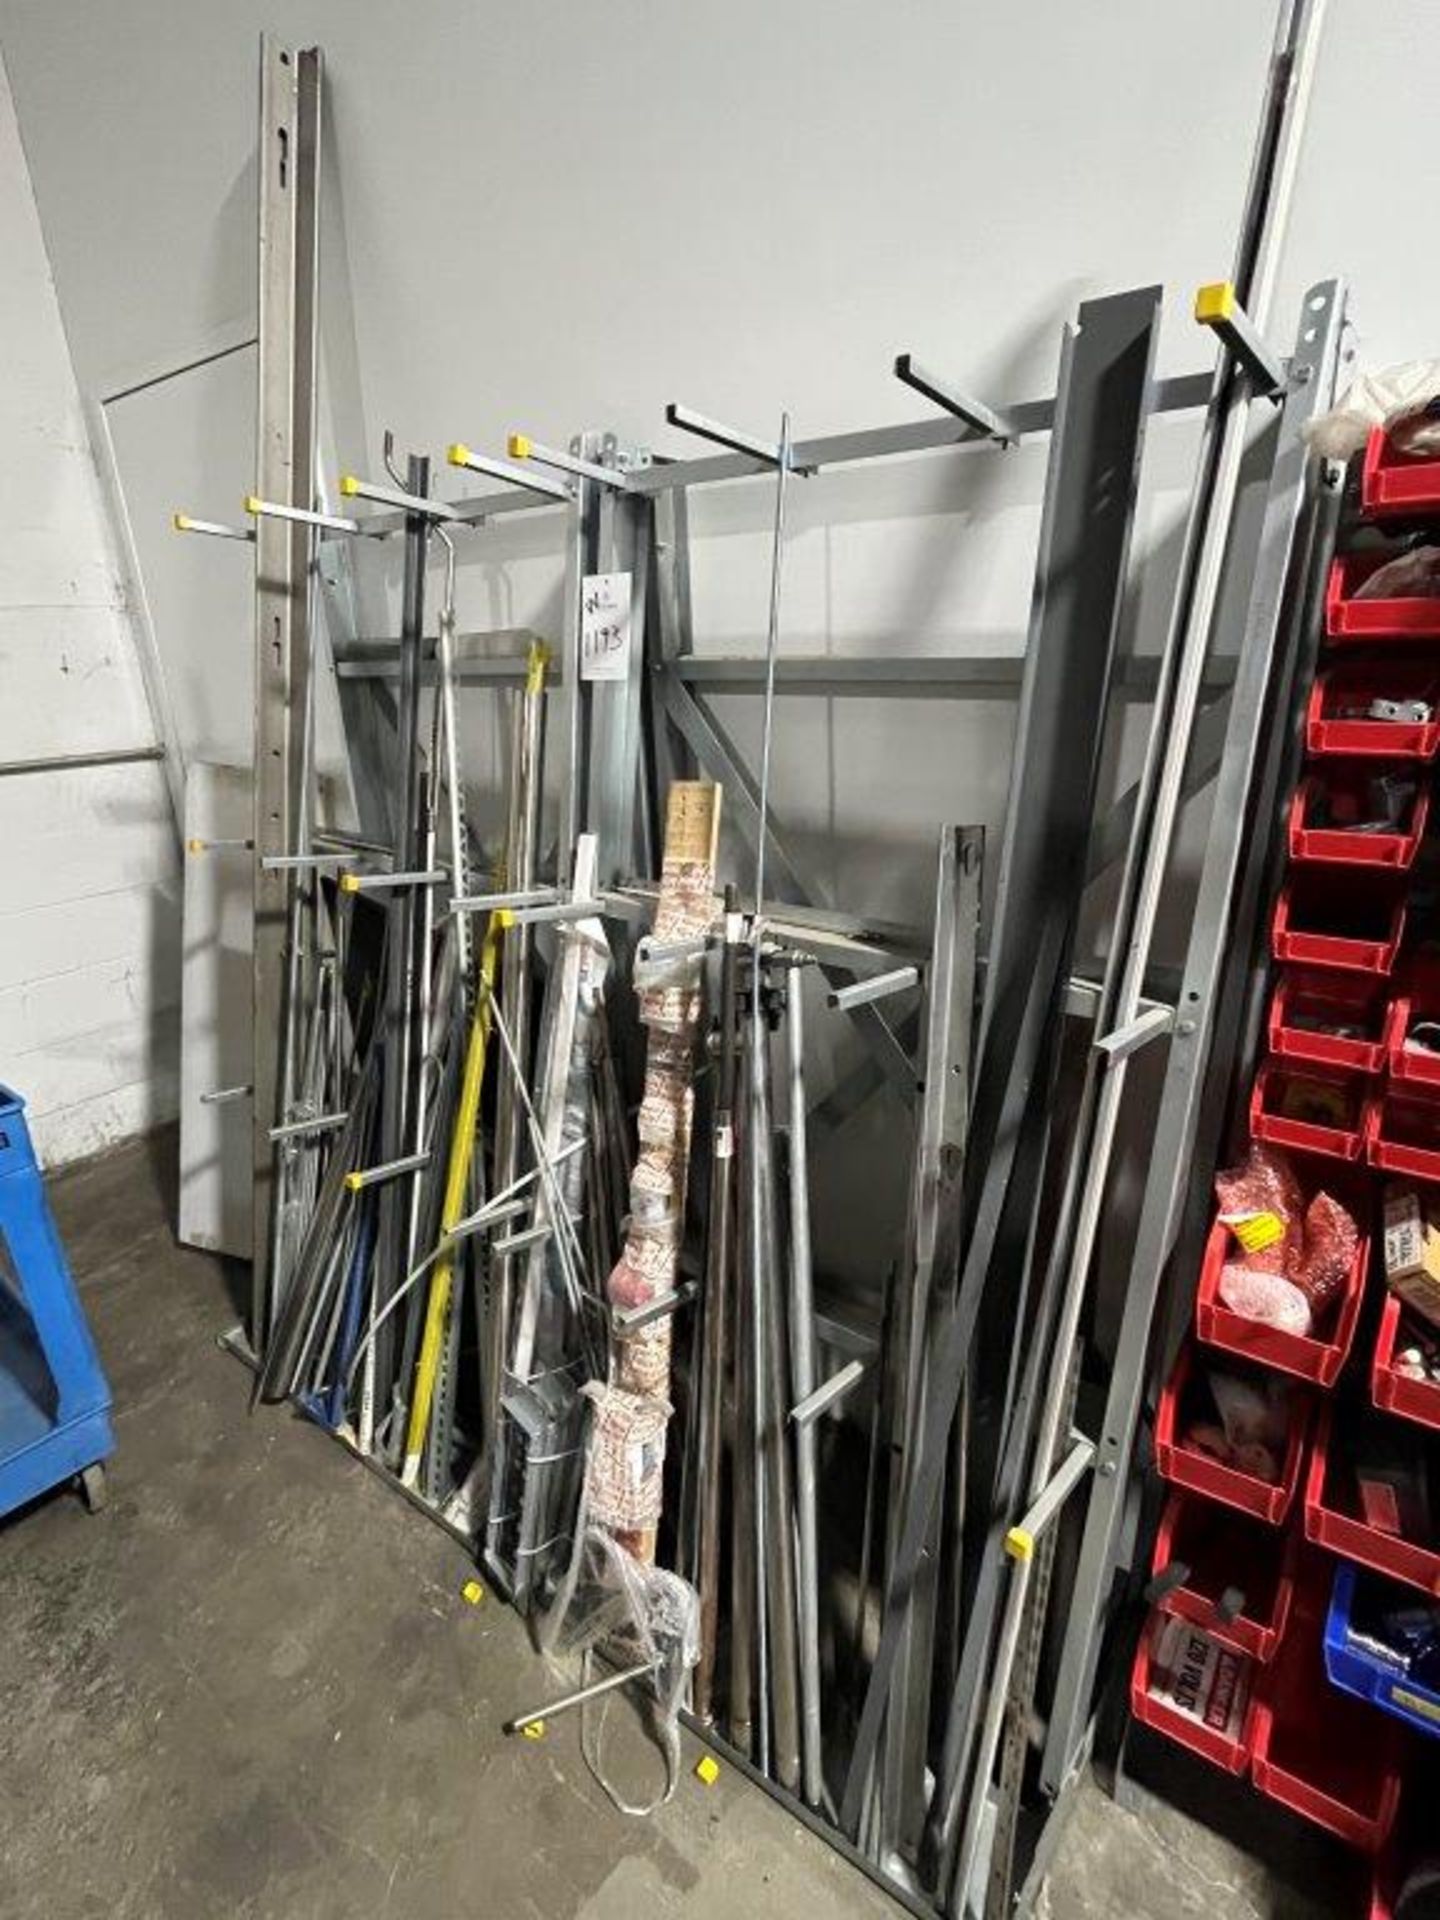 (3) Vestil 246999 Material Rack 36" x 70" with Contents